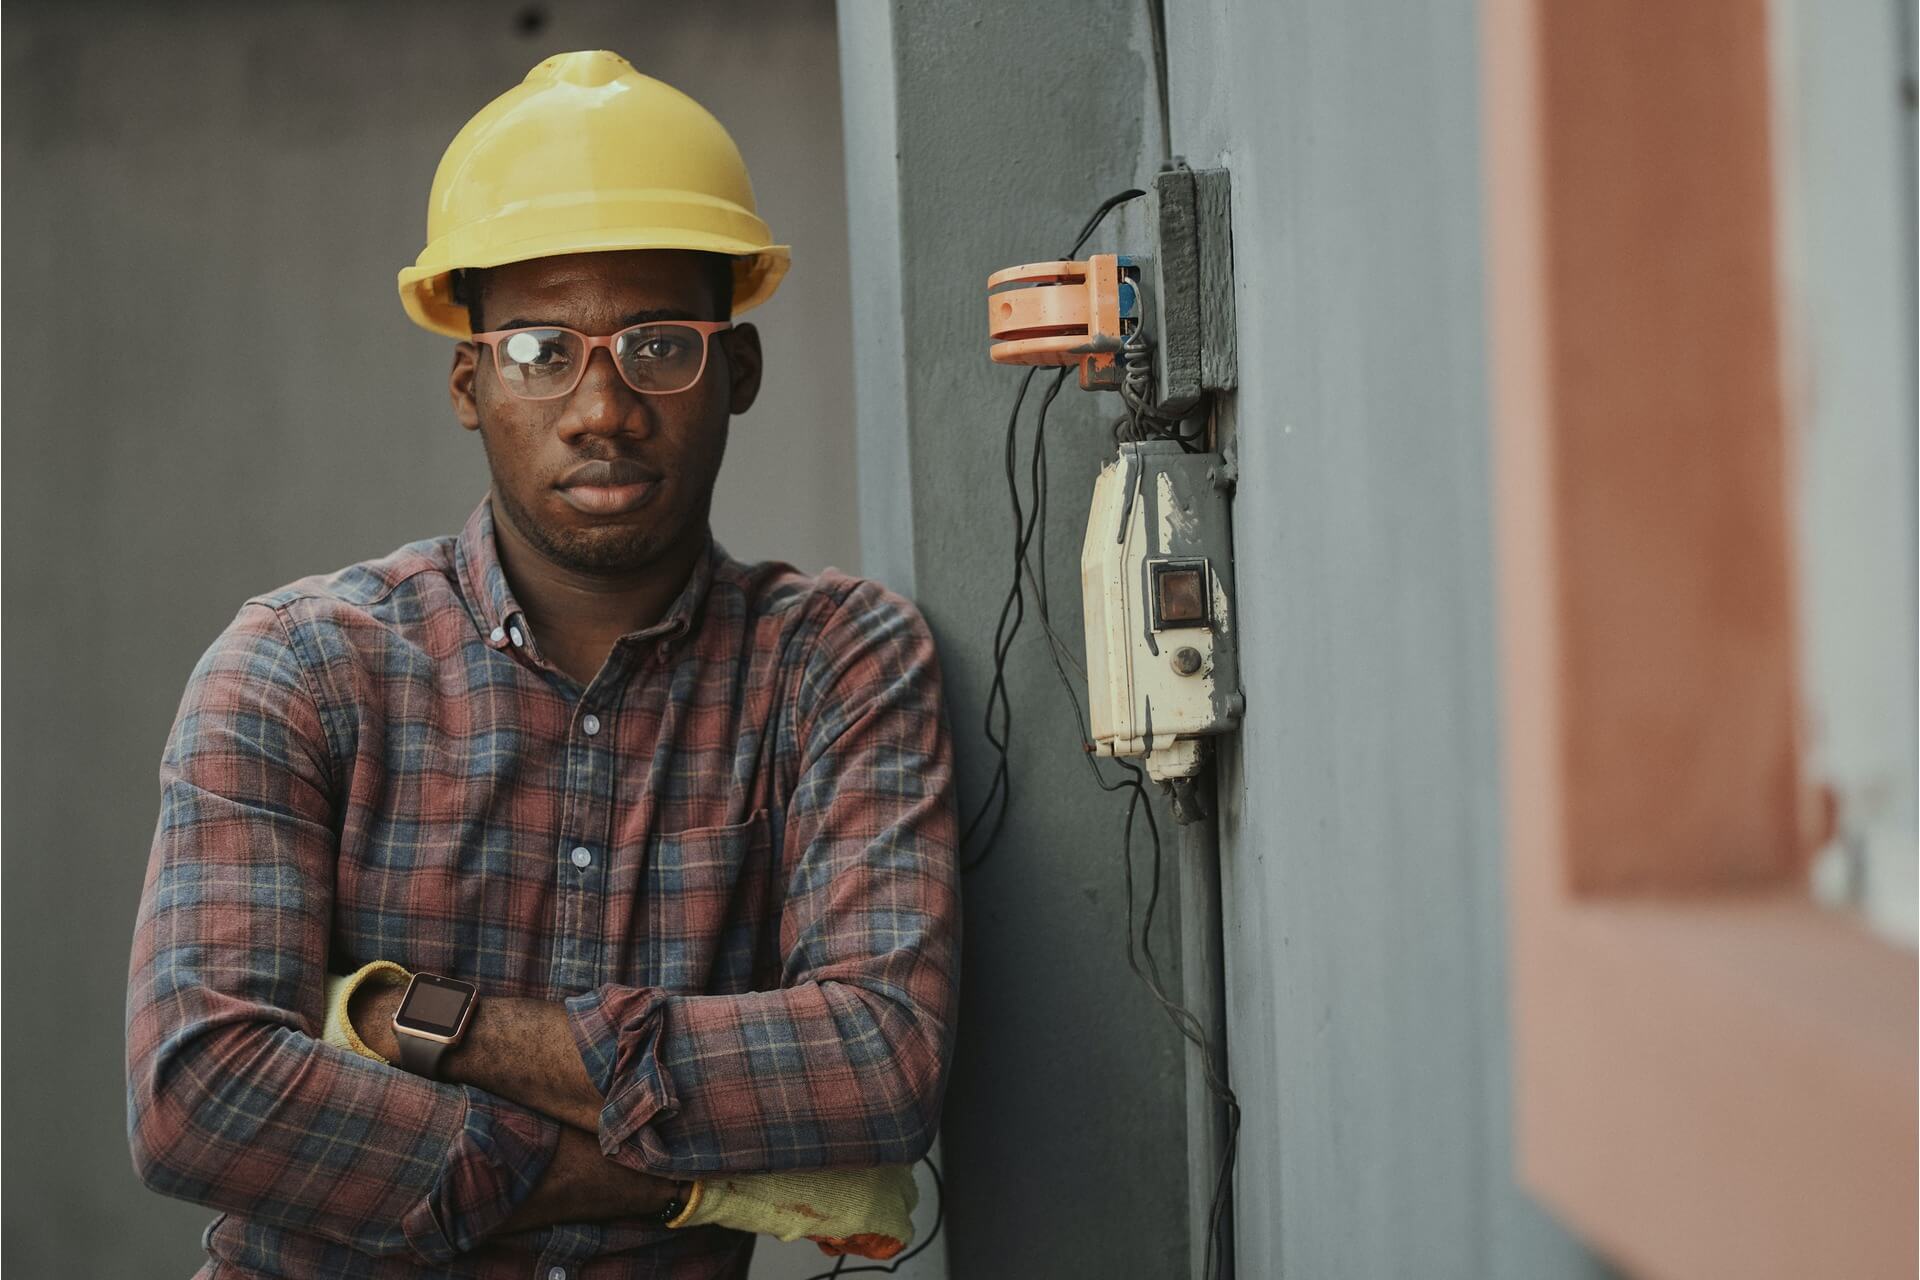 An electrician standing with arms crossed.